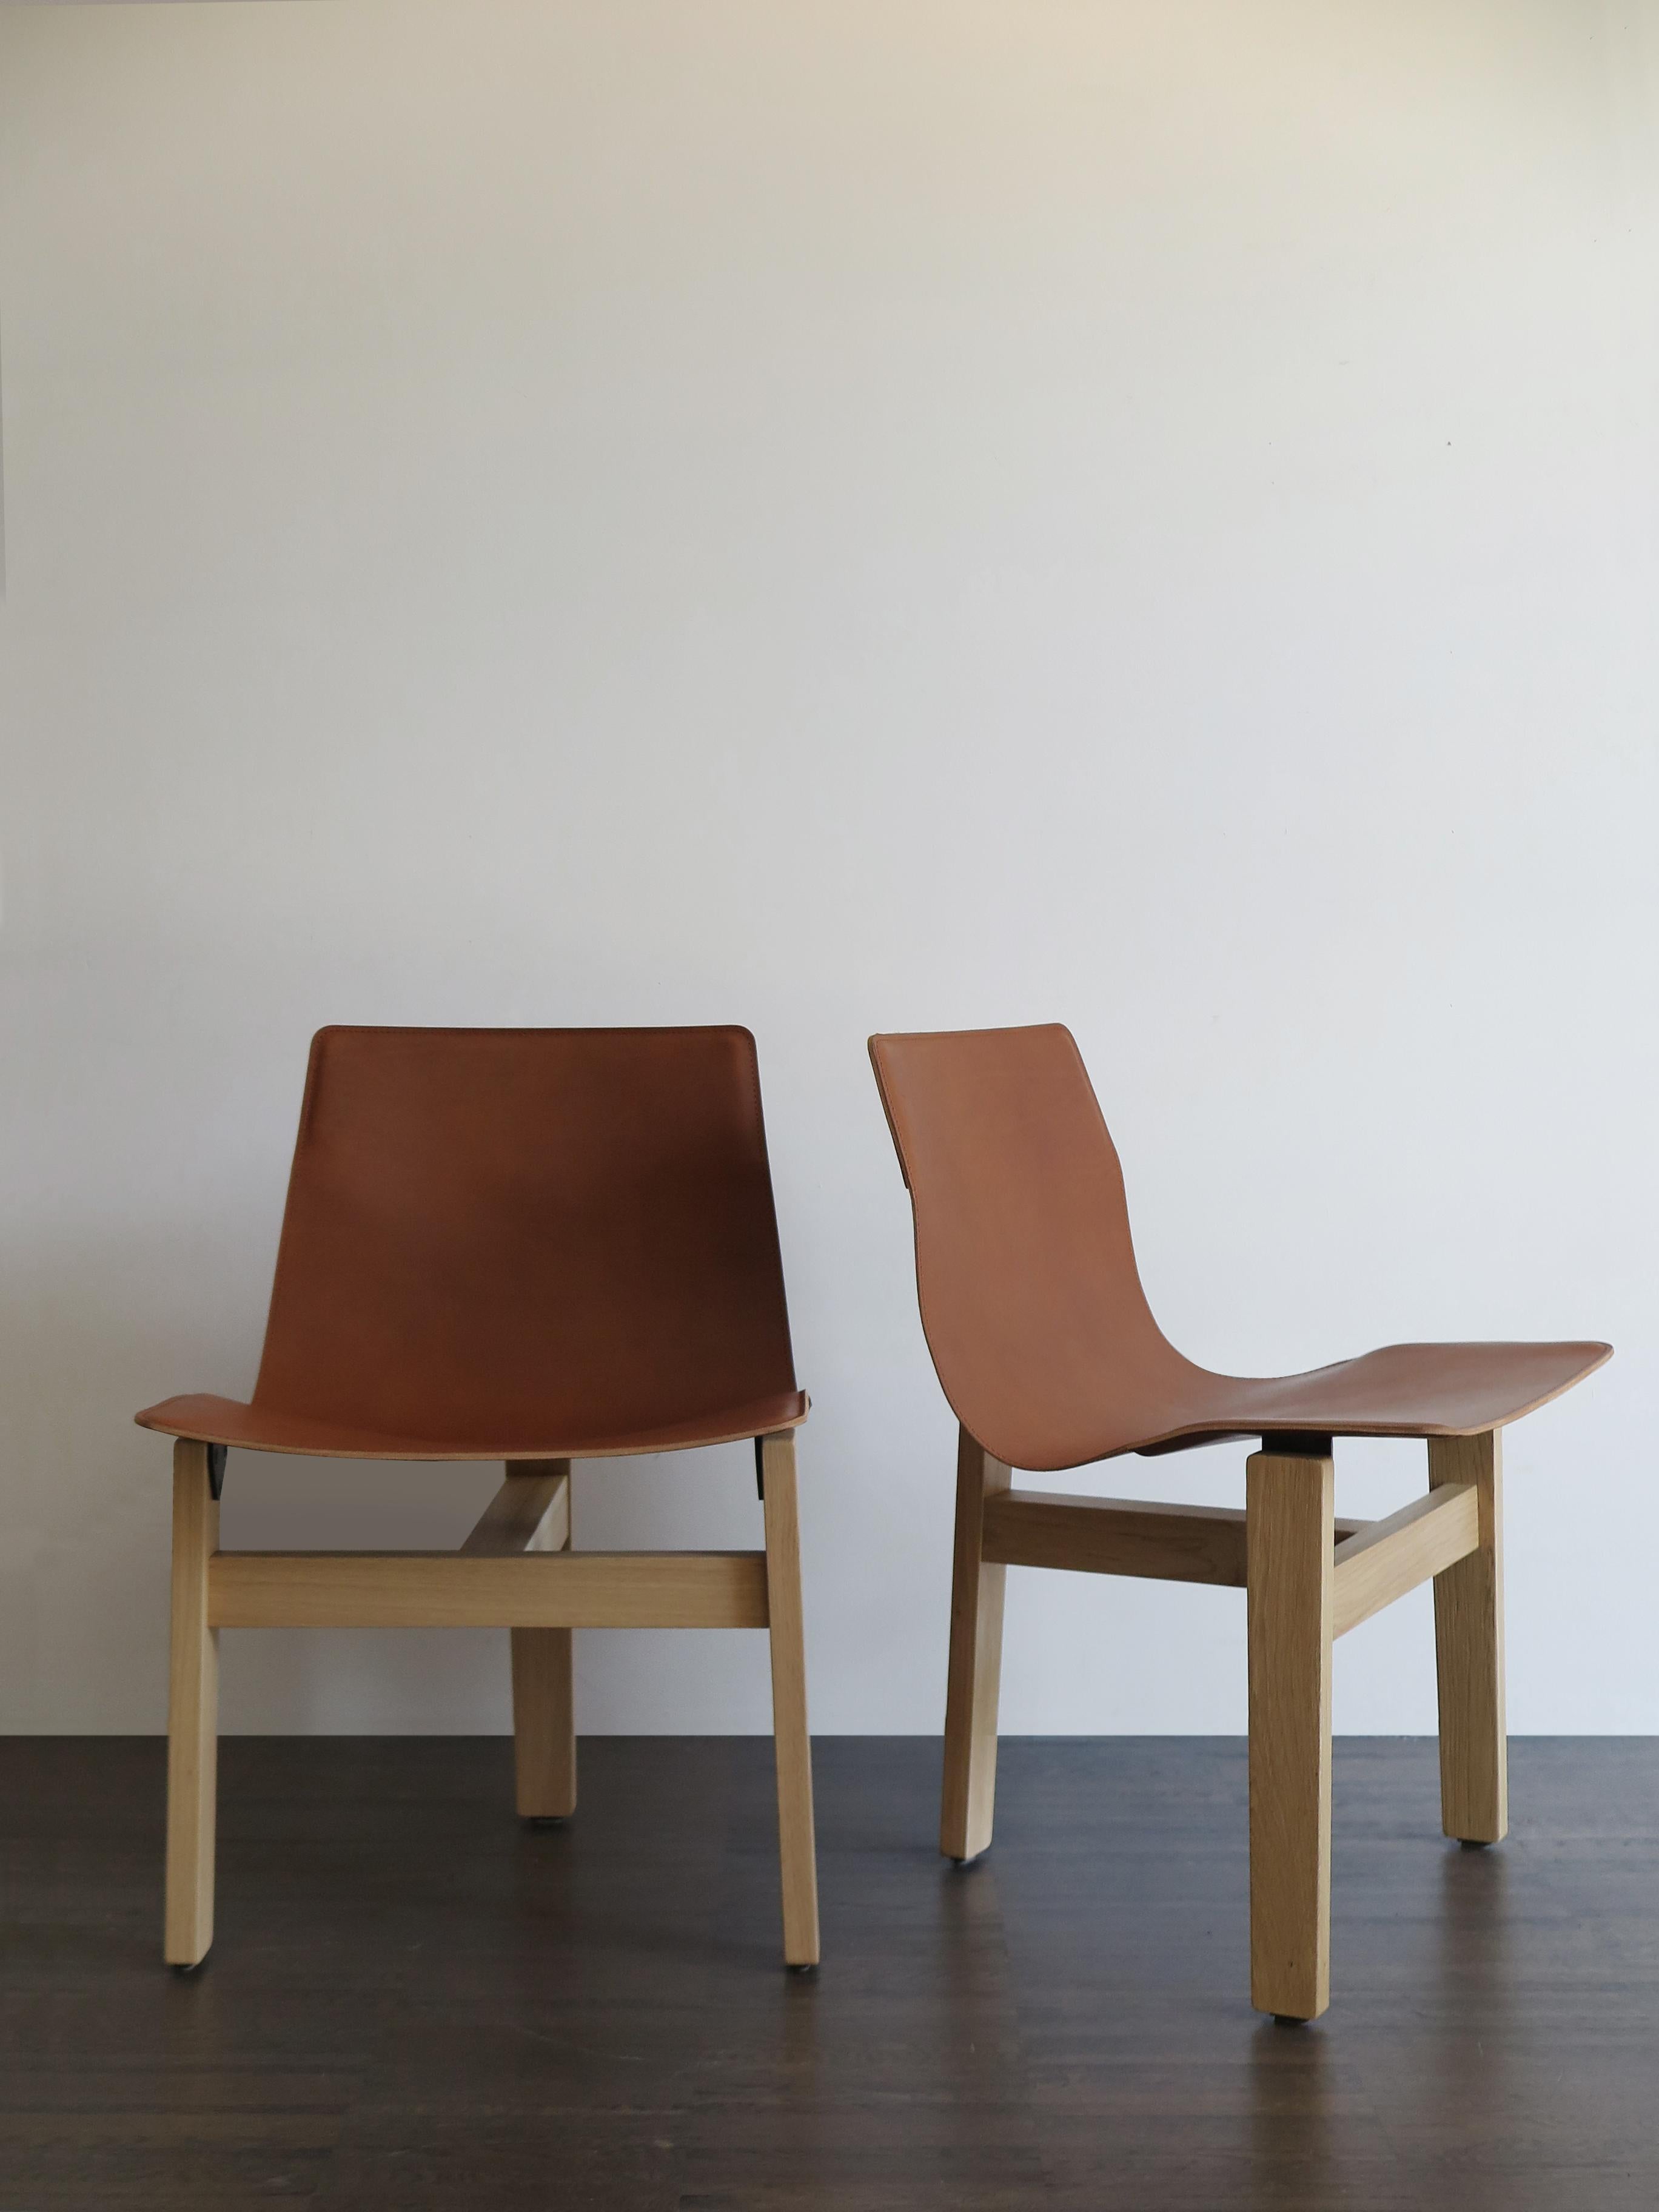 Italian dining chairs model 3T designed by Angelo mangiarotti from 1978 made of traditional materials like wood and leather feauturing simple but elegant constuction details.
New production by Agapecasa with designer and manufacturer’s mark